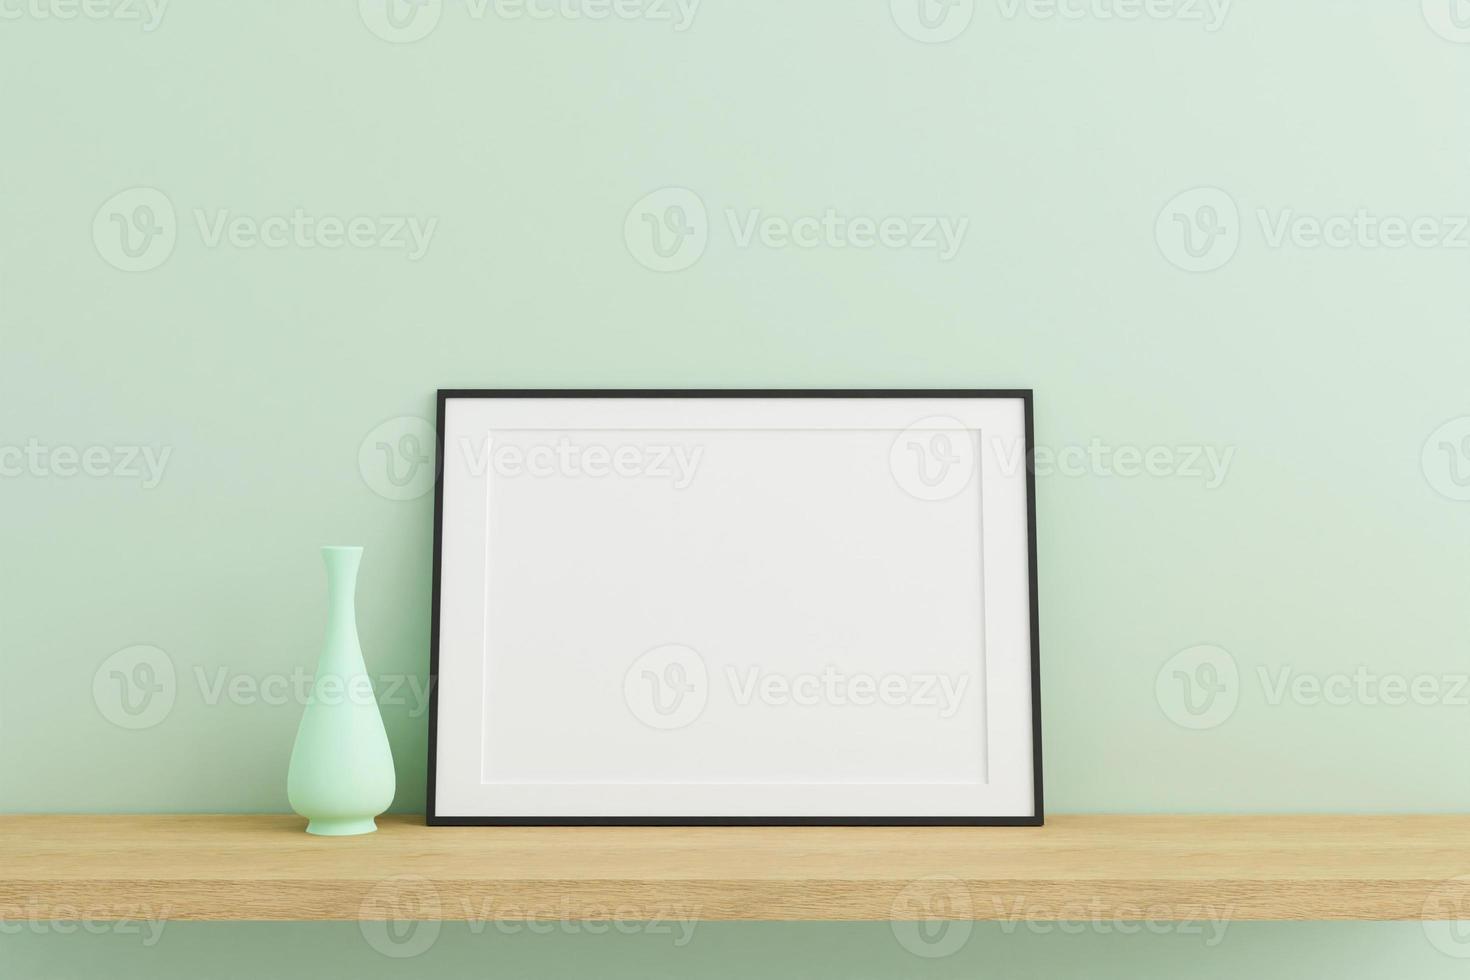 Horizontal black poster or photo frame mockup on wooden table in living room interior with vase. 3D rendering.